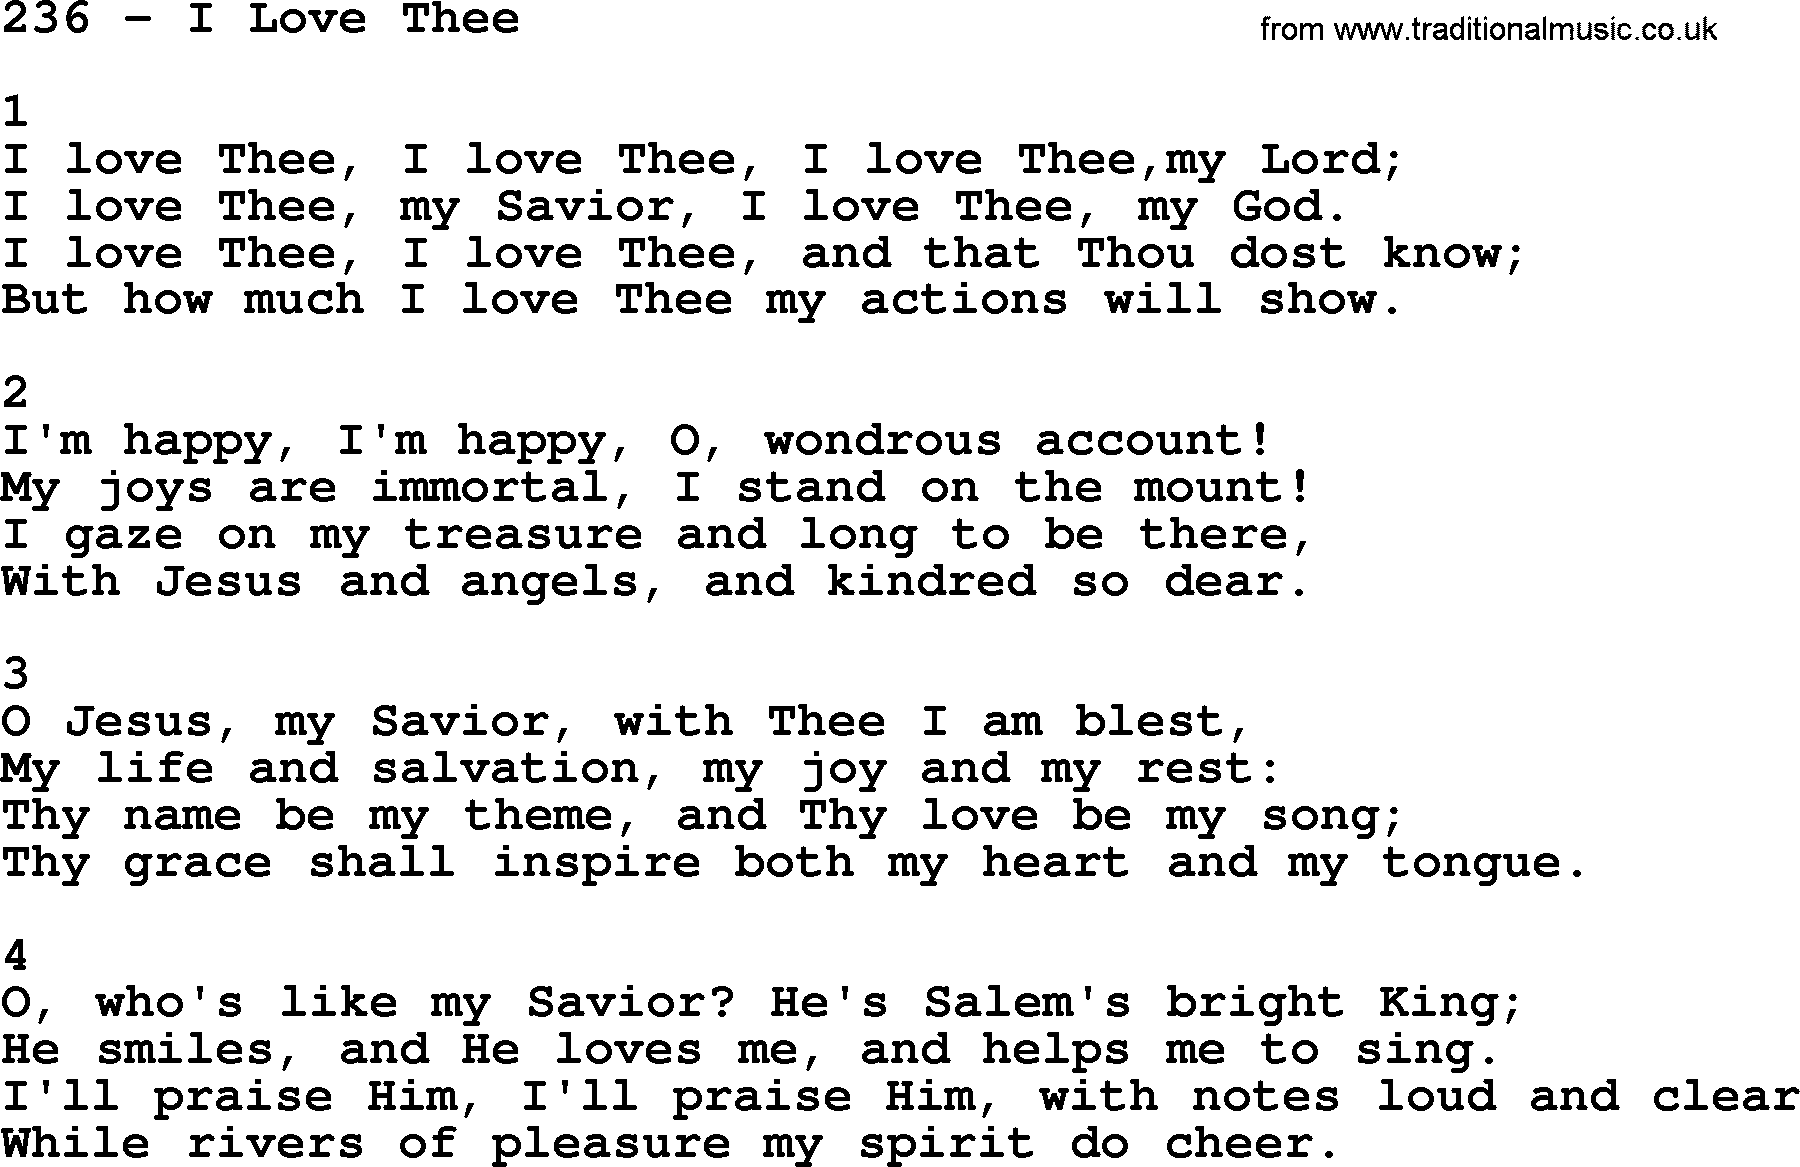 Complete Adventis Hymnal, title: 236-I Love Thee, with lyrics, midi, mp3, powerpoints(PPT) and PDF,